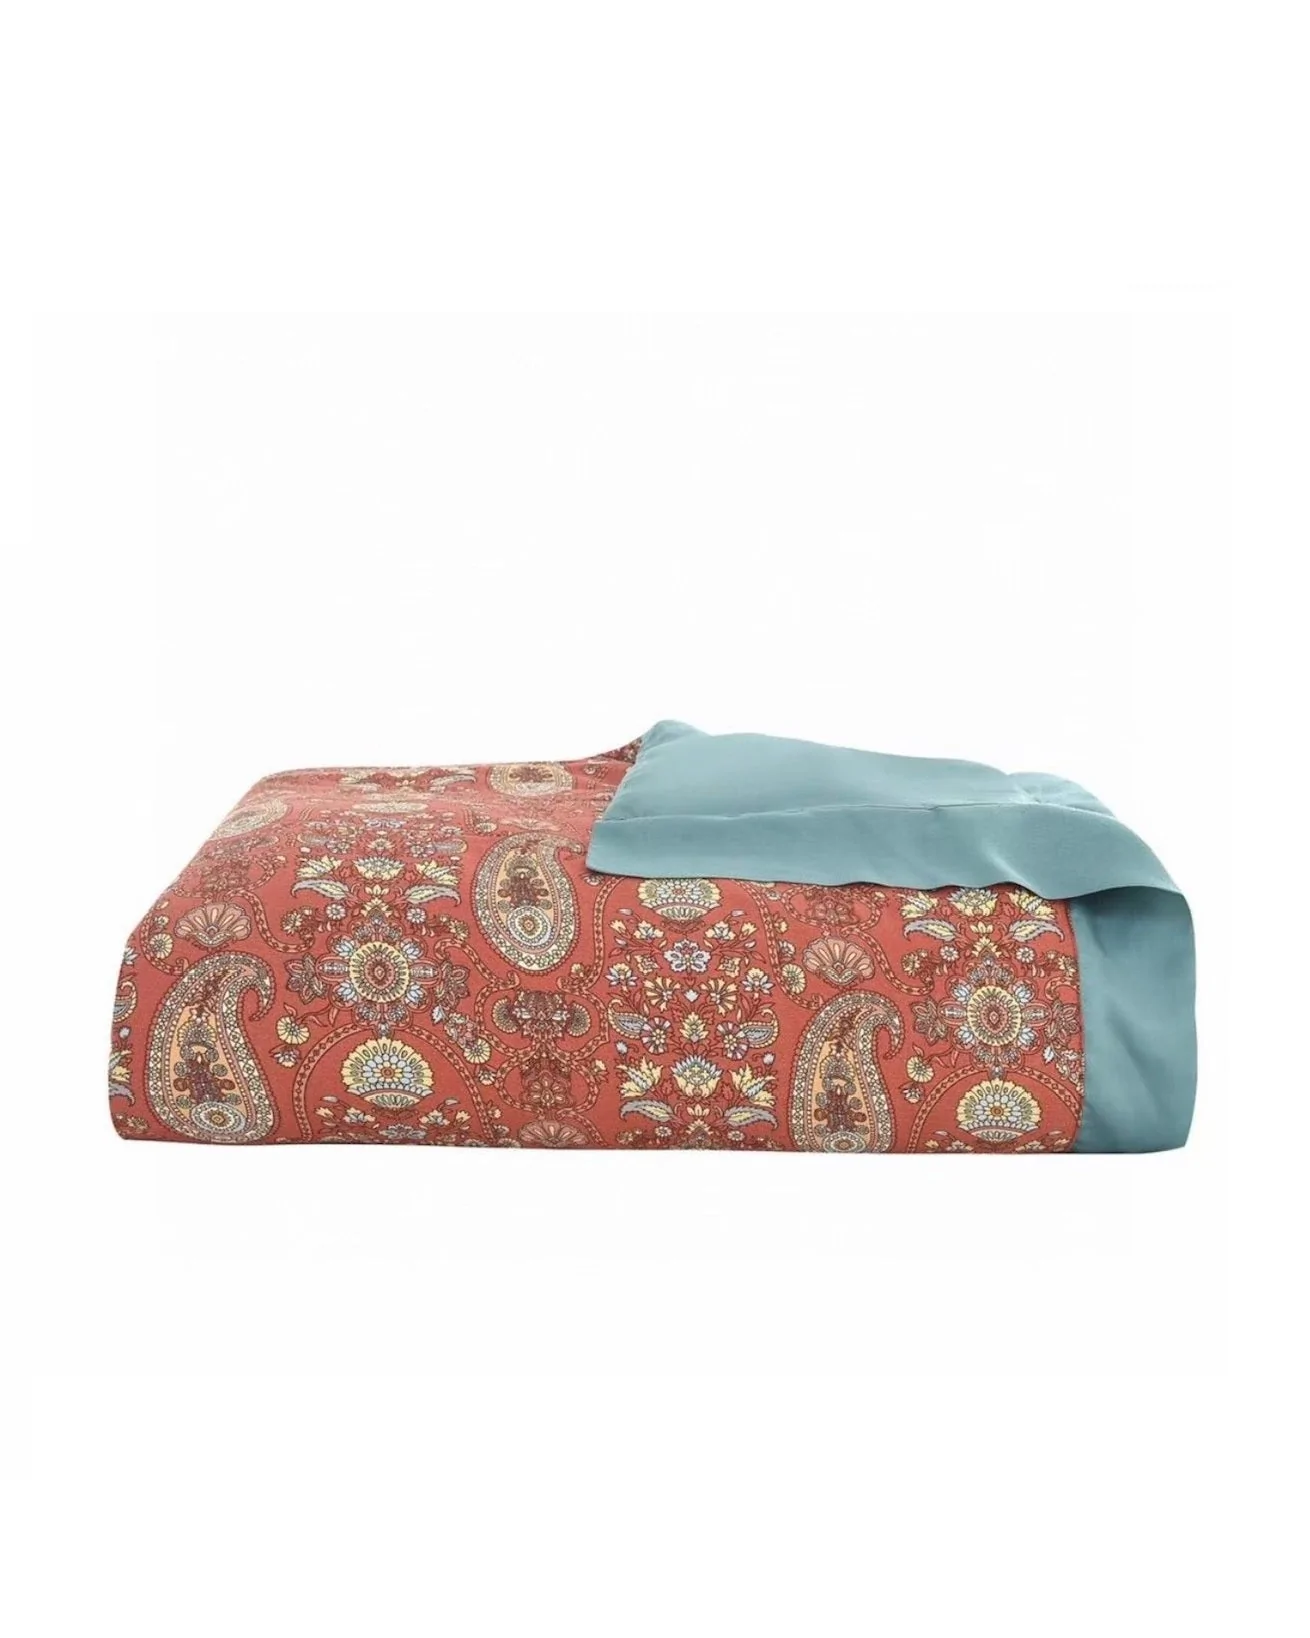 Ralph Lauren Home Paisley Series Cool Comforter In Soft Red Multi